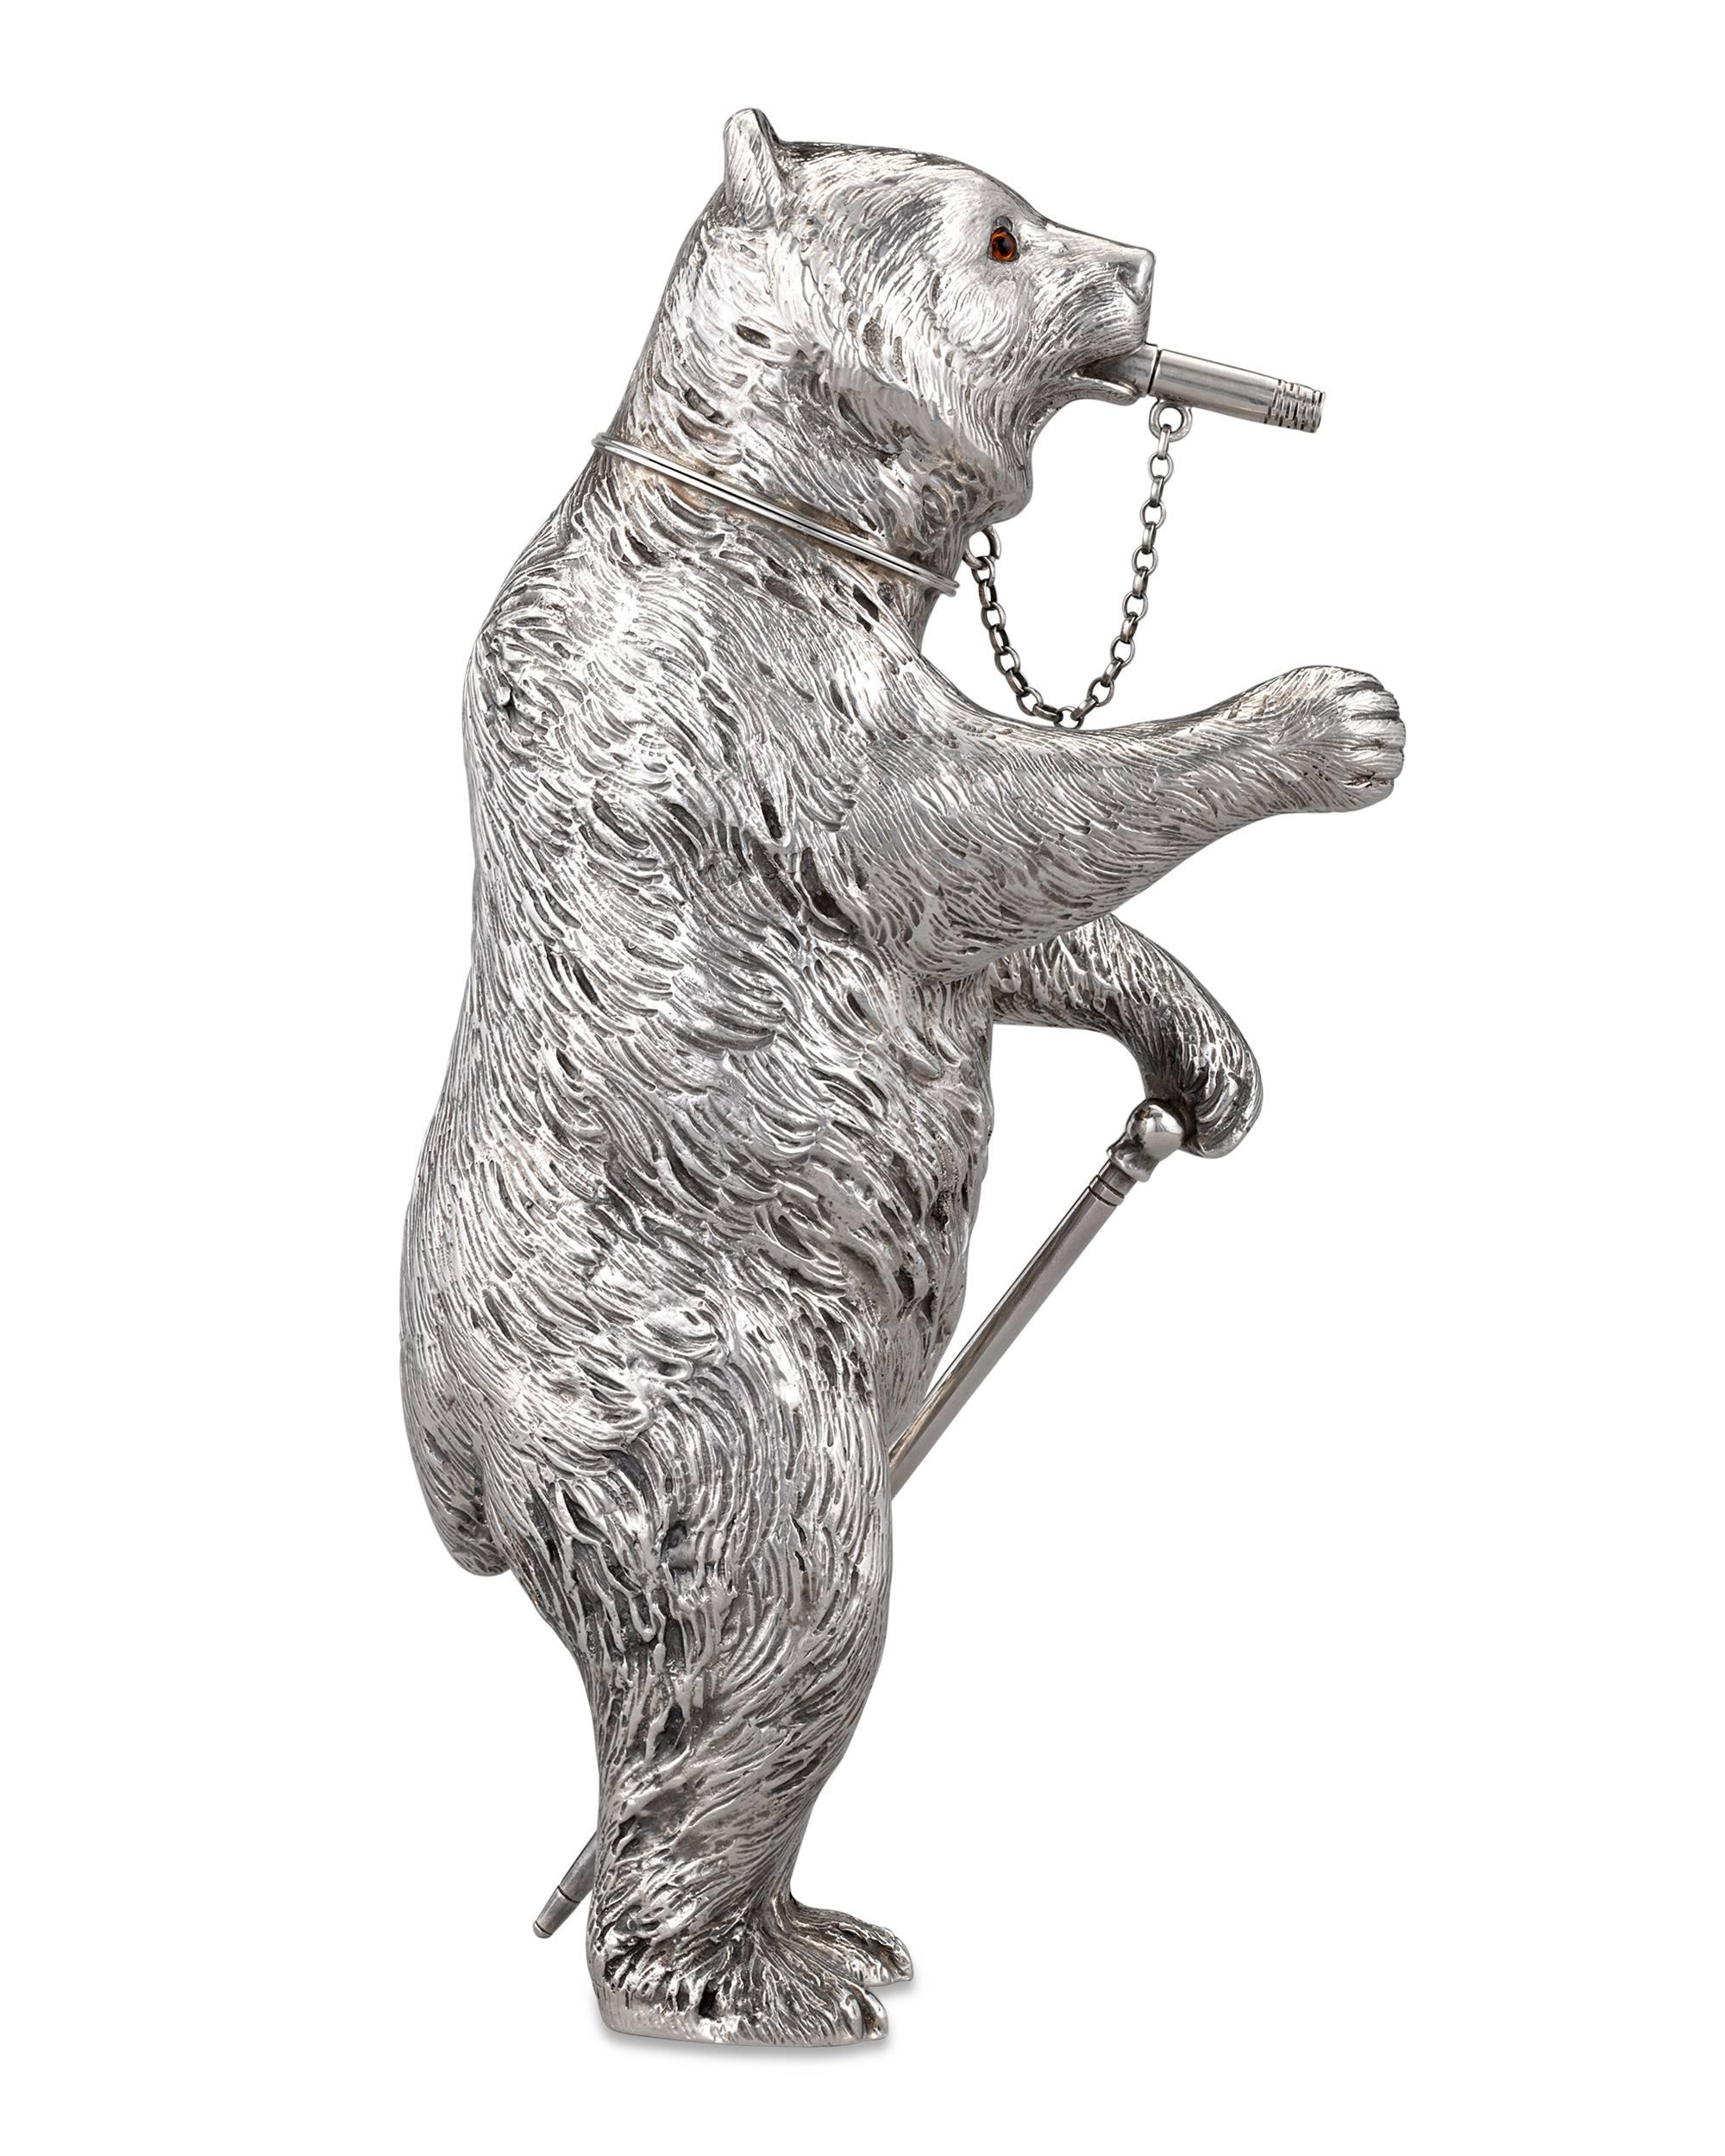 This highly imaginative sterling silver cocktail shaker takes the shape of a humorous and realistically modeled bear. Donning a walking stick and smoking a cigar, the ursine shaker embodies the joie de vivre of the era. The design is equally